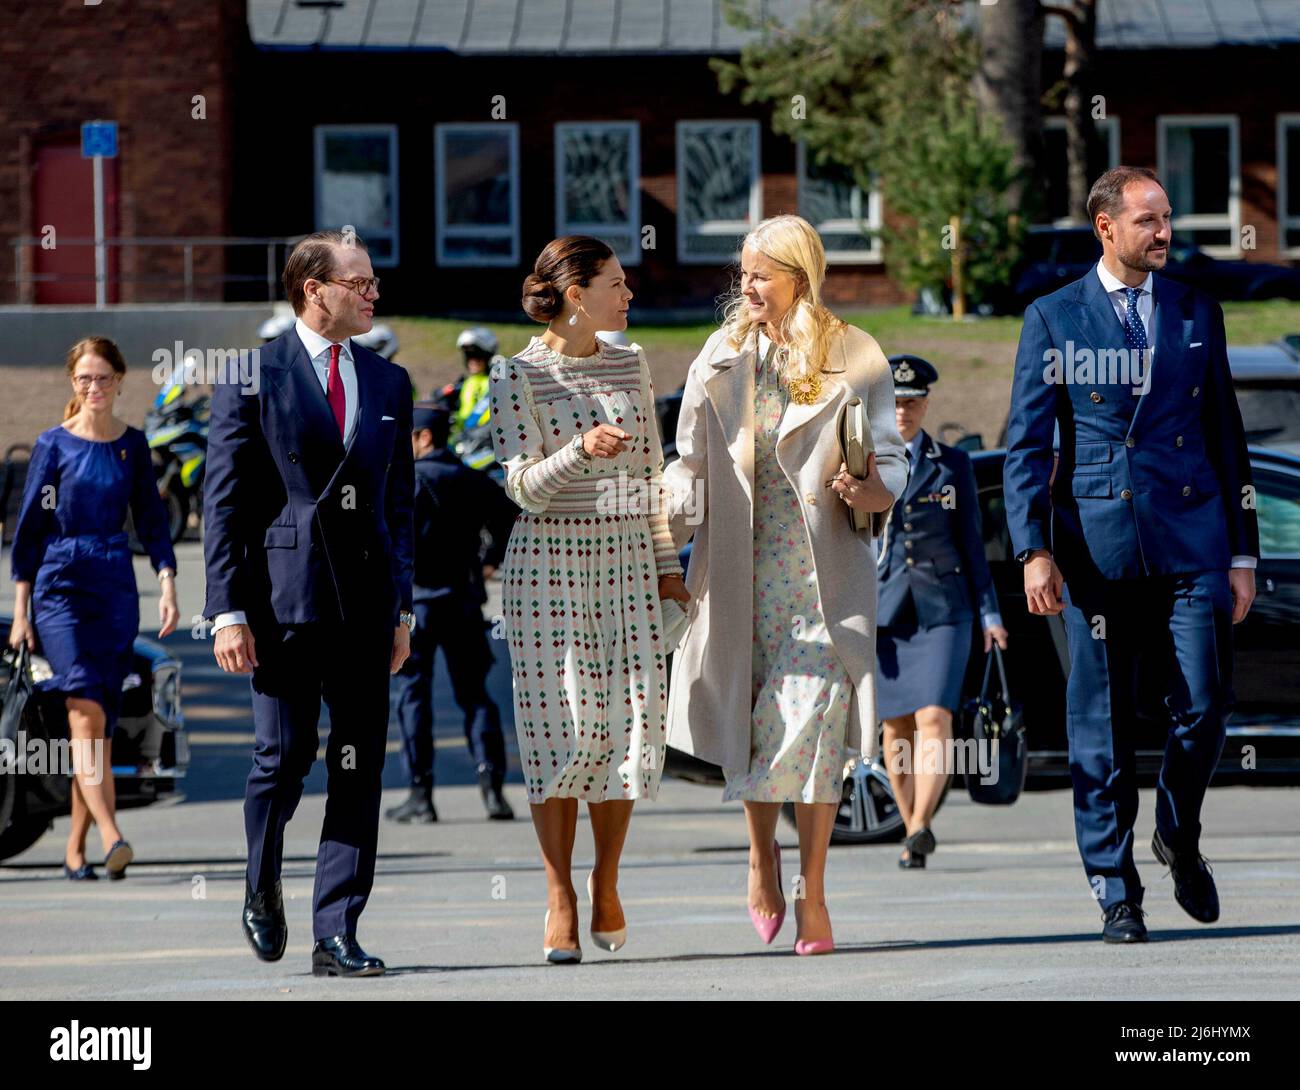 Crown Princess Victoria and Prince Daniel of Sweden, Crown Prince Haakon and Crown Princess Mette Marit of Norway arrive at the Karolinska Institutet in Solna, on May 02, 2022, to attend the opening of a business seminar, on the 1st of a 3 days Official Visit to Sweden from Norway Photo: Albert Nieboer / Netherlands OUT / Point de Vue OUT Stock Photo